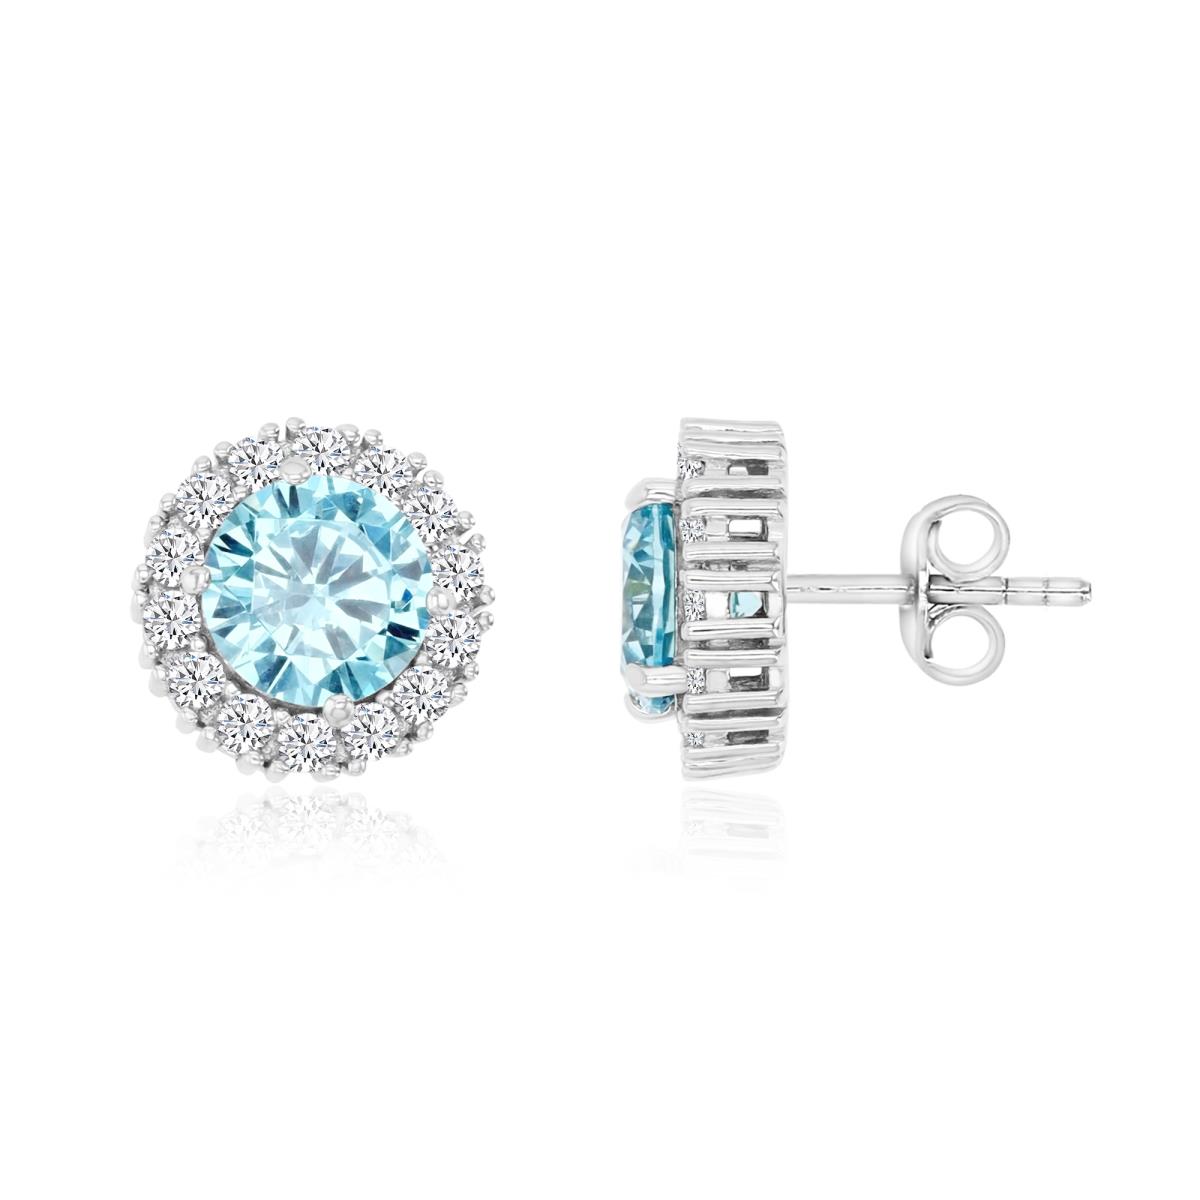 Sterling Silver 8mm Round Pave Light Blue & White CZ Stud Earring